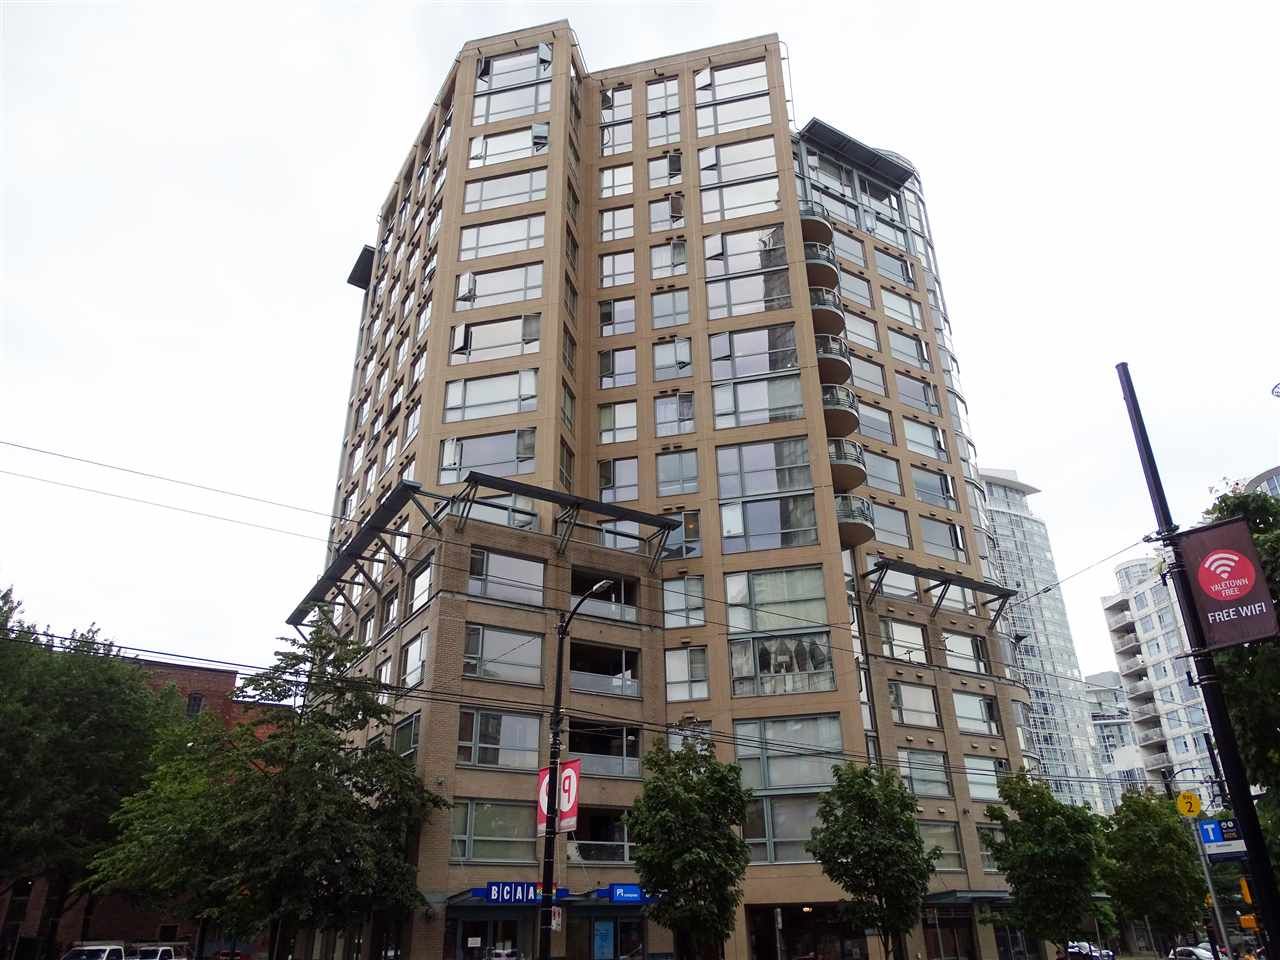 Main Photo: 1406 283 DAVIE Street in Vancouver: Yaletown Condo for sale (Vancouver West)  : MLS®# R2492666